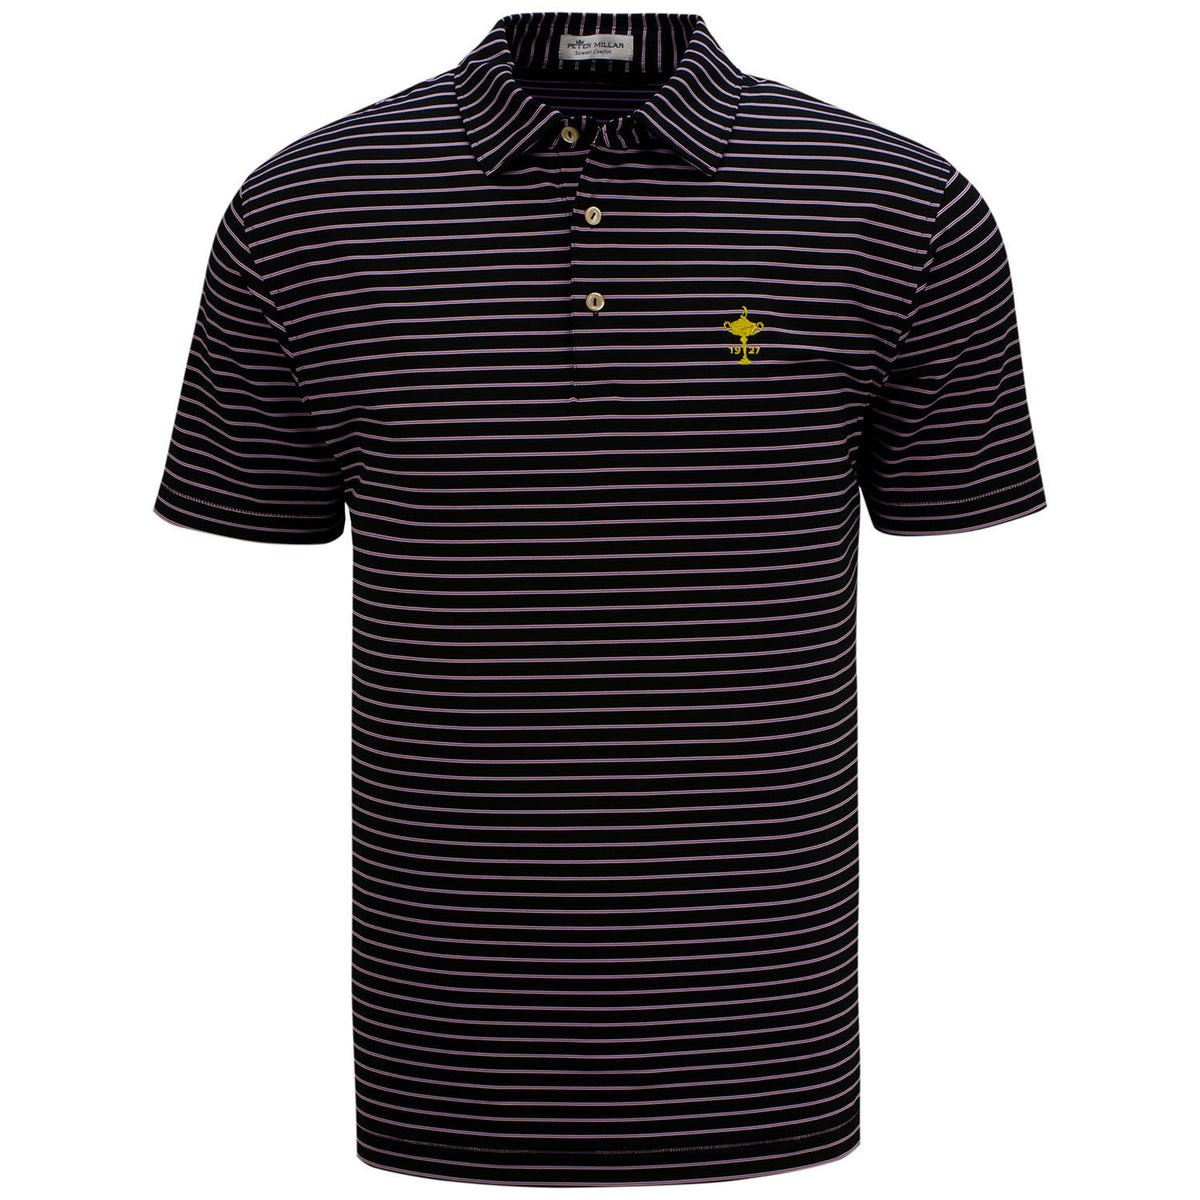 Ryder Cup Peter Millar Drum Performance Jersey Polo in Black- Front View